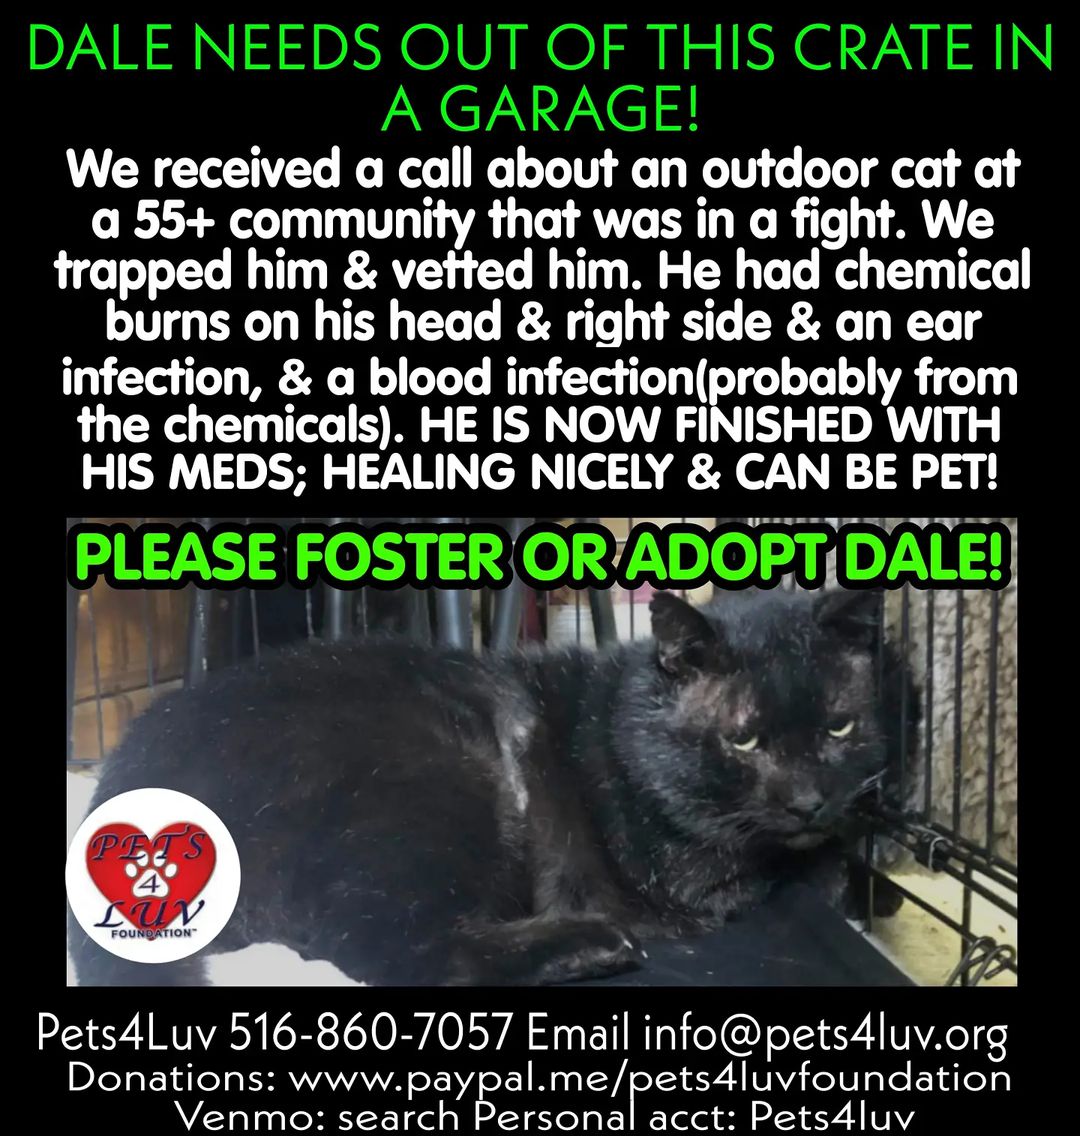 Please FOSTER OR ADOPT DALE! CONTACT: PETS4LUV (Long Island NY) 516-860-7057 Email info@pets4luv.org  DONATE:  PAYPAL:  www.paypal.me/pets4luvfoundation  VENMO: search Personal acct: Pets4luv (David Bernacchi)  PERSONAL CHECK: message or email us for a mailing address. Online Adoption Application: https://petstablished.com/adoption_form/25146/generic Online Foster Application: https://petstablished.com/foster_form/25162/generic <a target='_blank' href='https://www.instagram.com/explore/tags/pets4luvfoundation/'>#pets4luvfoundation</a> <a target='_blank' href='https://www.instagram.com/explore/tags/catsofinstagram/'>#catsofinstagram</a> <a target='_blank' href='https://www.instagram.com/explore/tags/Dale/'>#Dale</a> <a target='_blank' href='https://www.instagram.com/explore/tags/fosteringsaveslives/'>#fosteringsaveslives</a> <a target='_blank' href='https://www.instagram.com/explore/tags/adoptdontshop/'>#adoptdontshop</a>